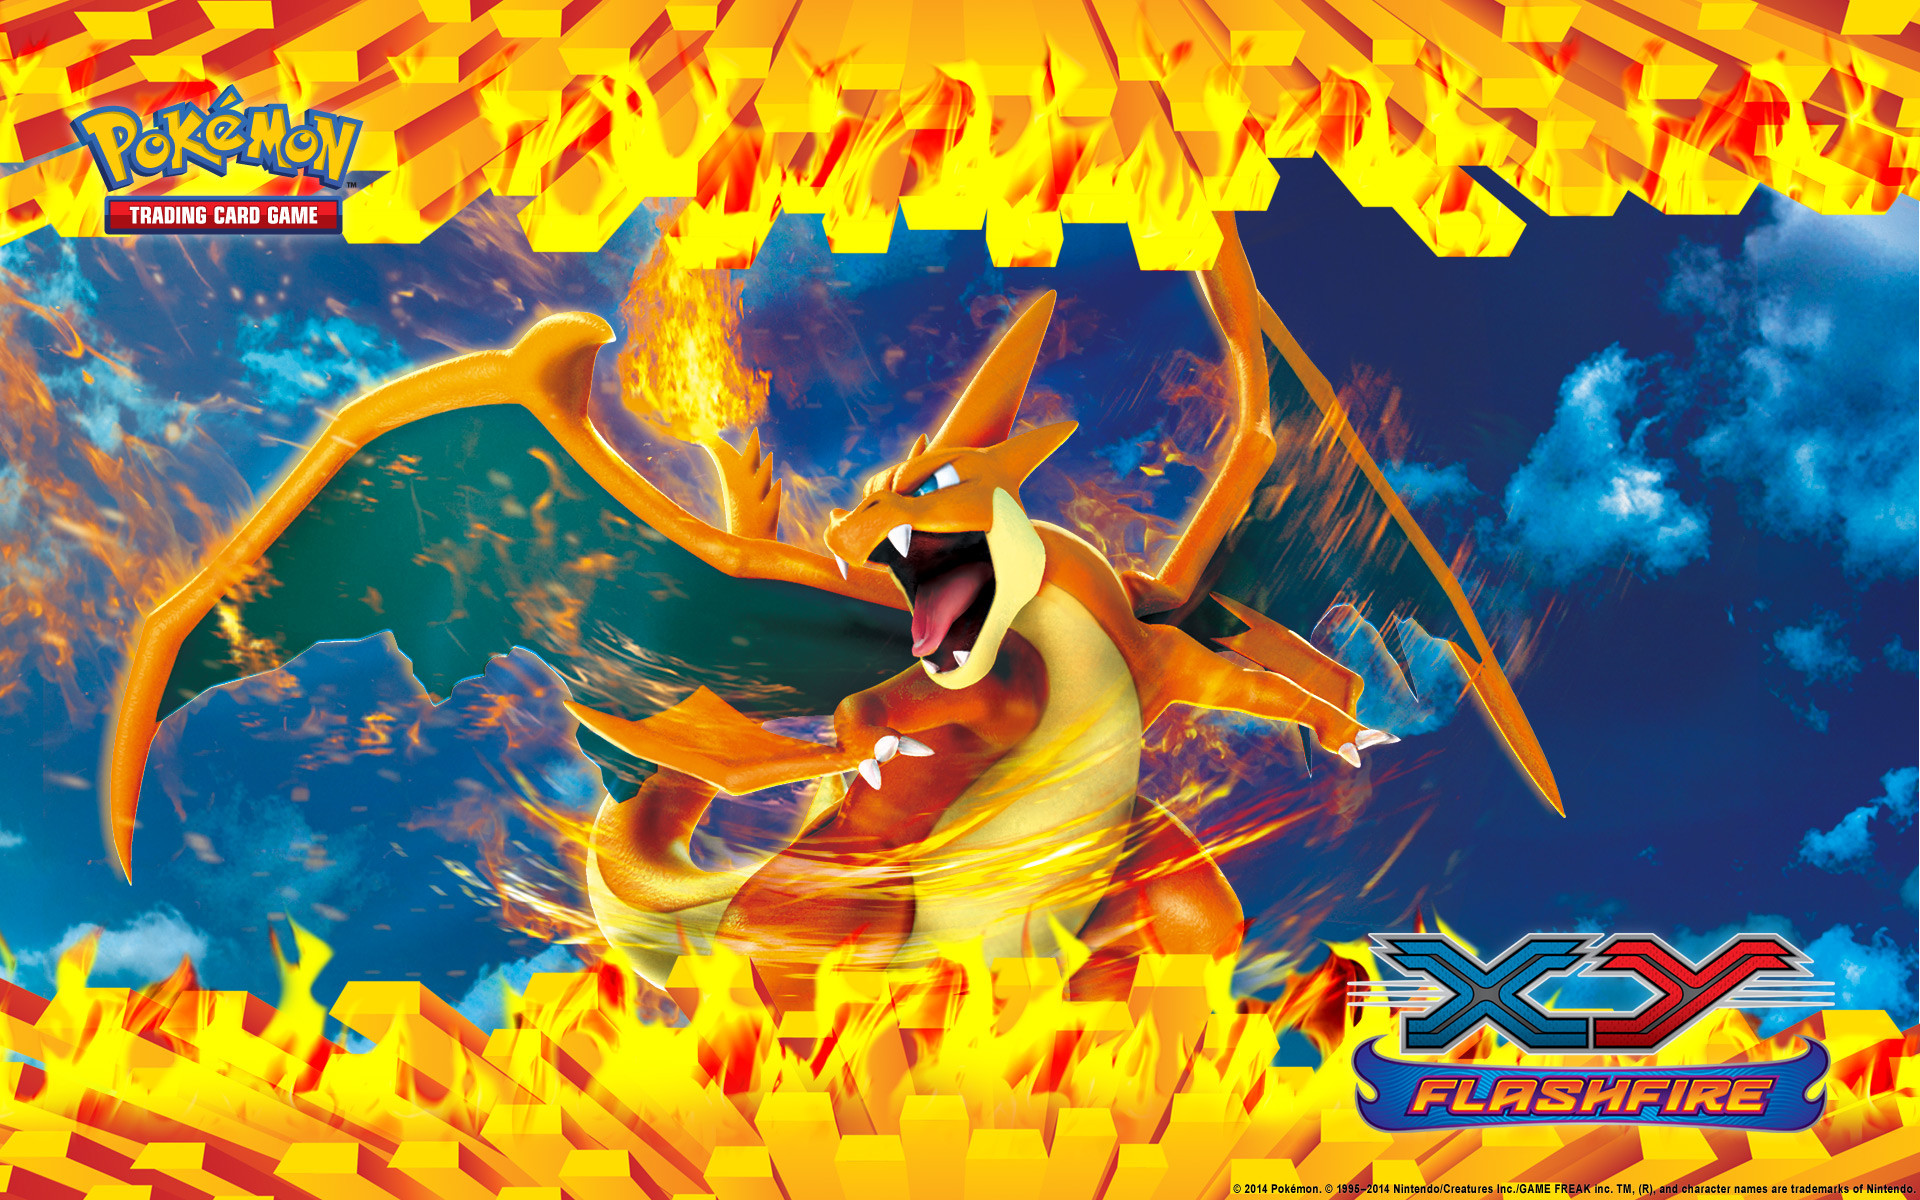 XOW Pictures of Pokemon HD, Awesome Wallpapers Wallpaper Pokemon Wallpapers